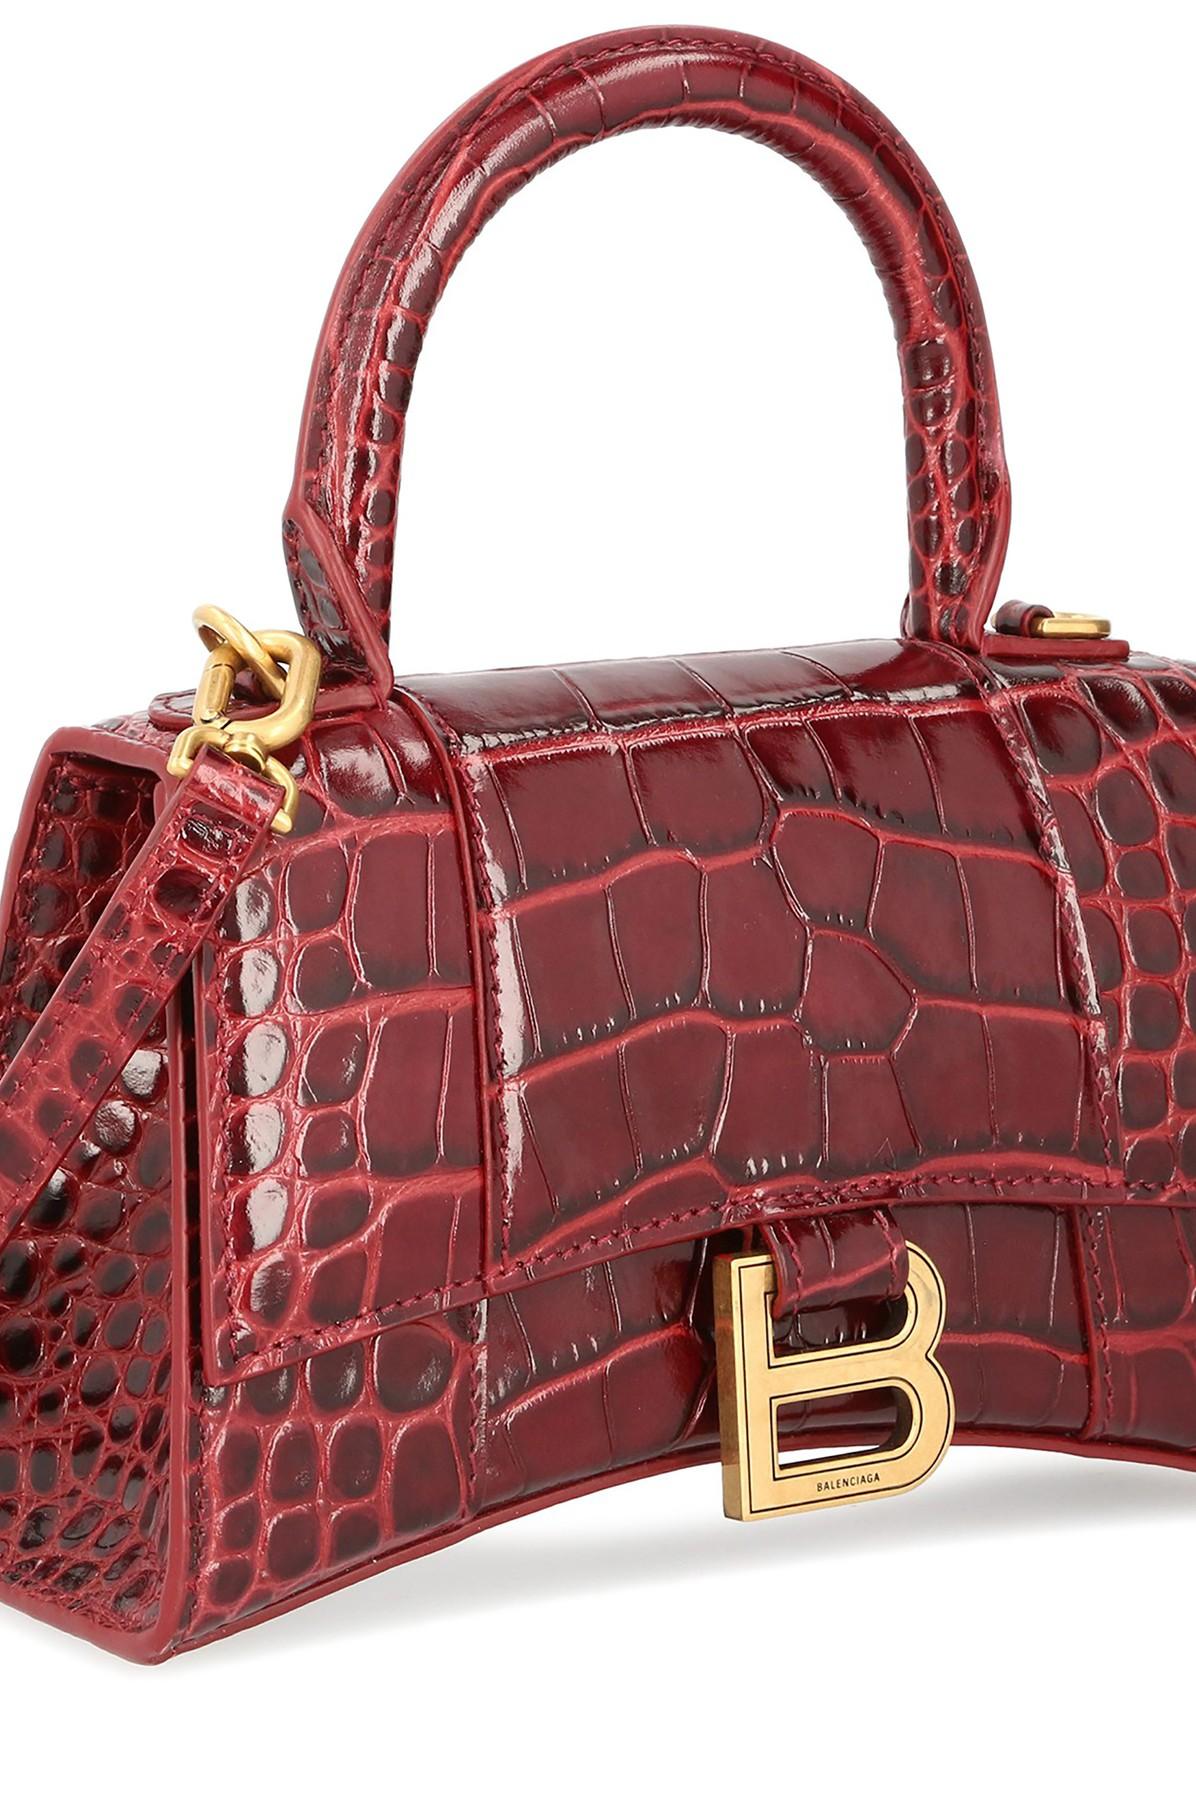 Balenciaga Hourglass Xs Top Handle Bag in Dark_red (Red) | Lyst